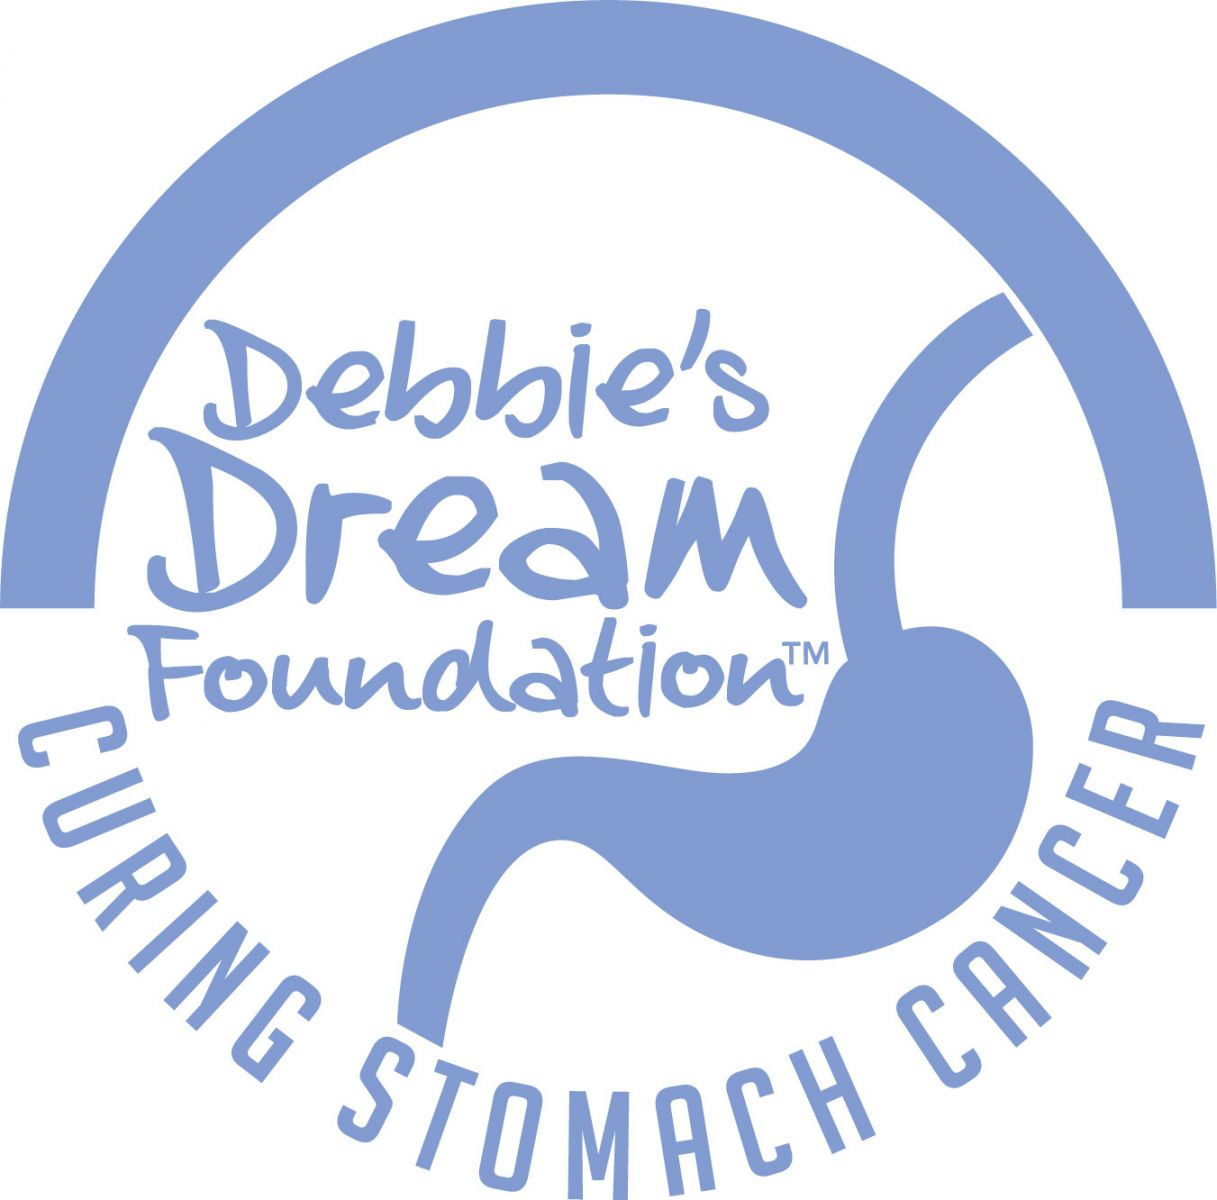 Debbie's Dream is finding a treatment for stomach cancer